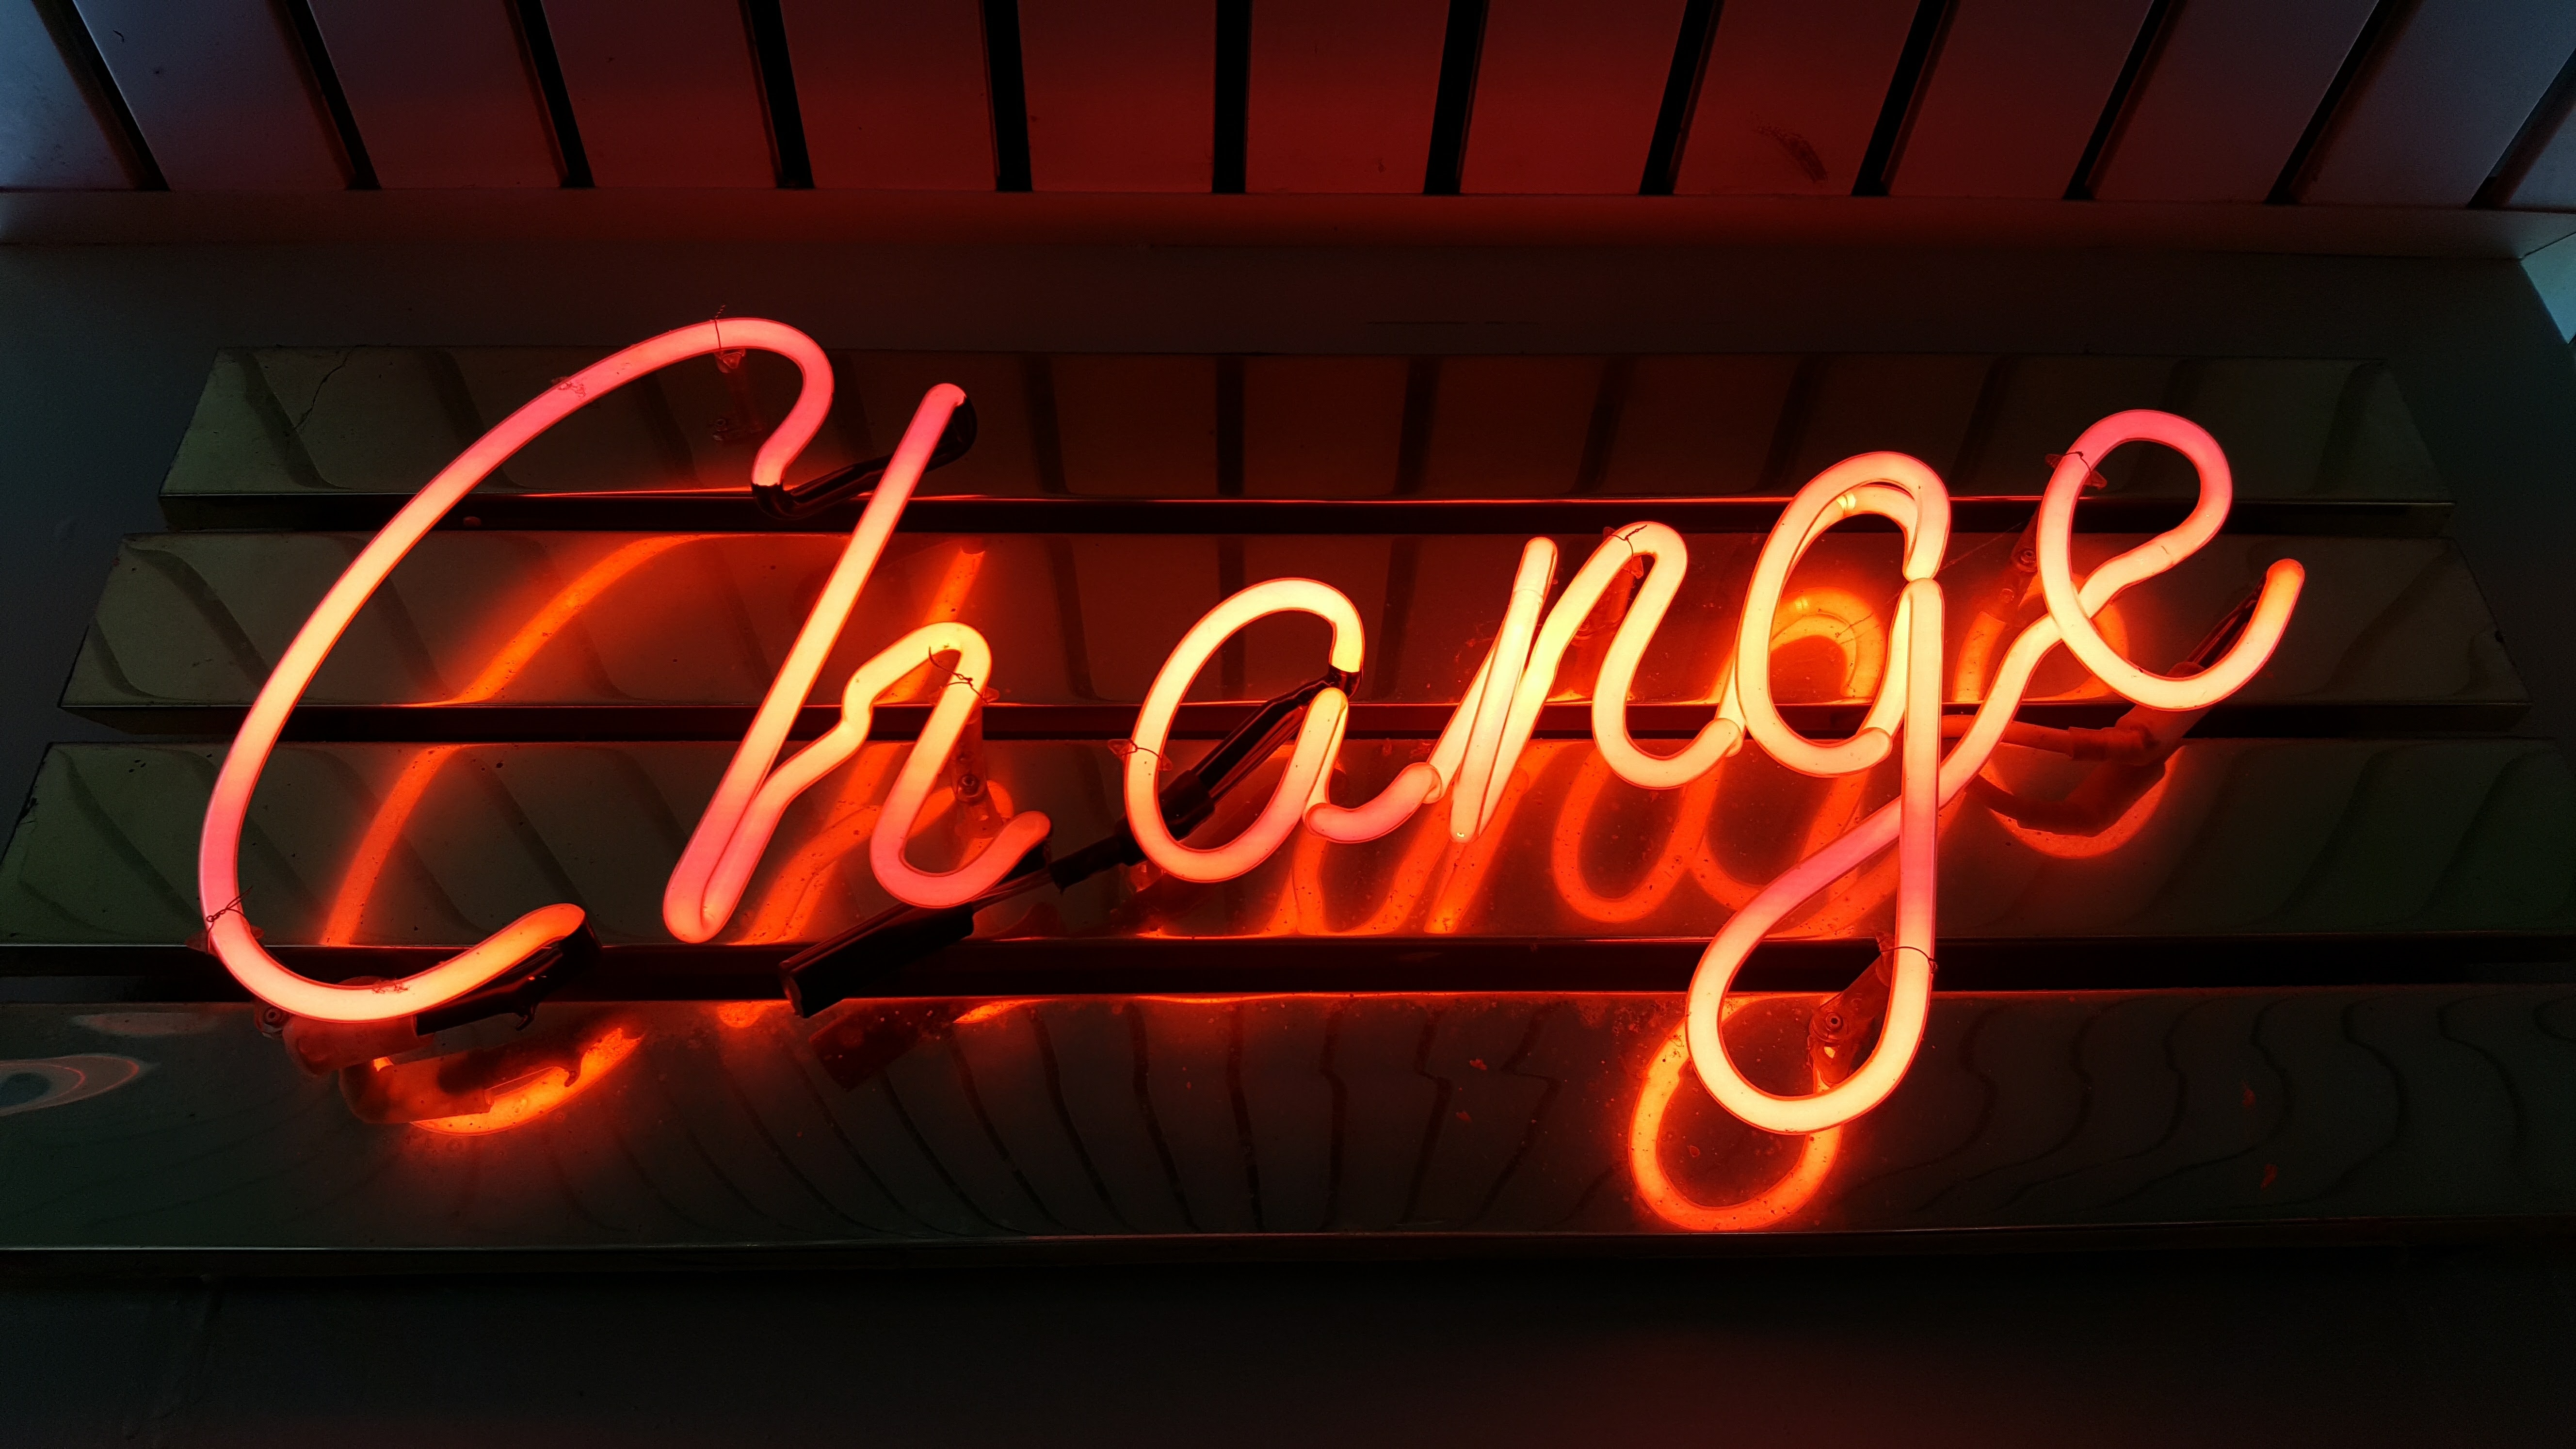 Fluorescent marquee saying "Change"